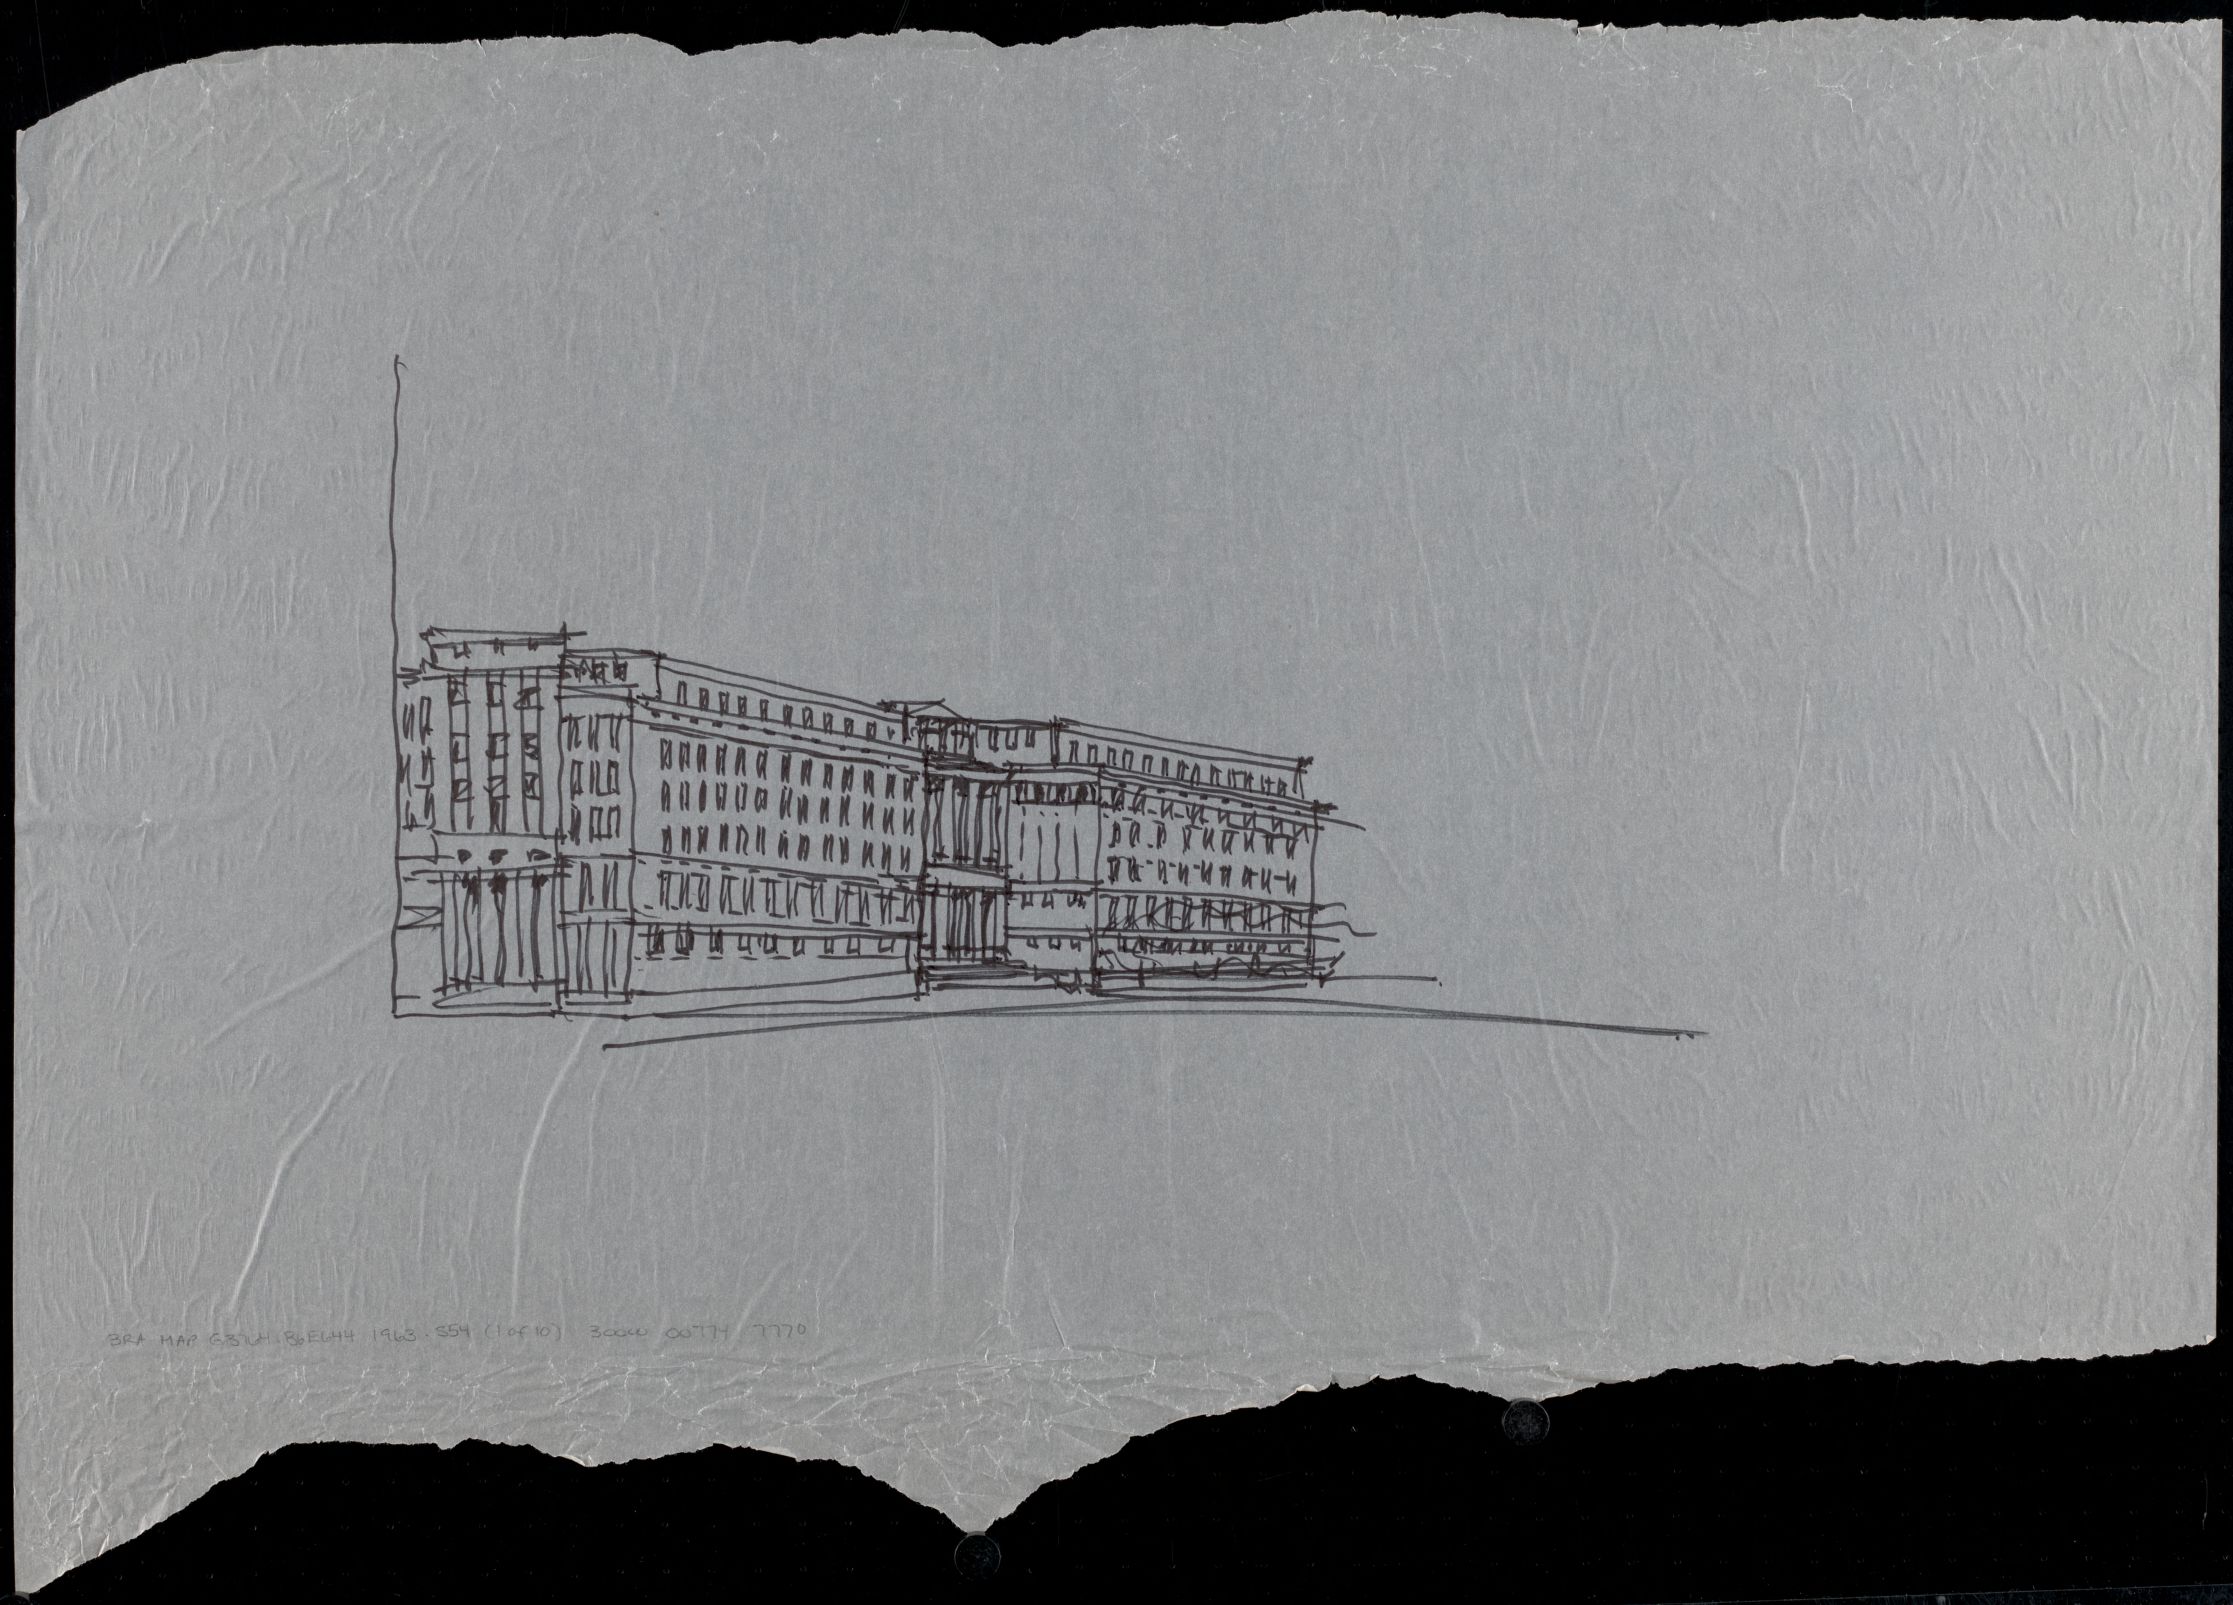 Sketches of a building to be constructed in City Hall Plaza north of Boston City Hall